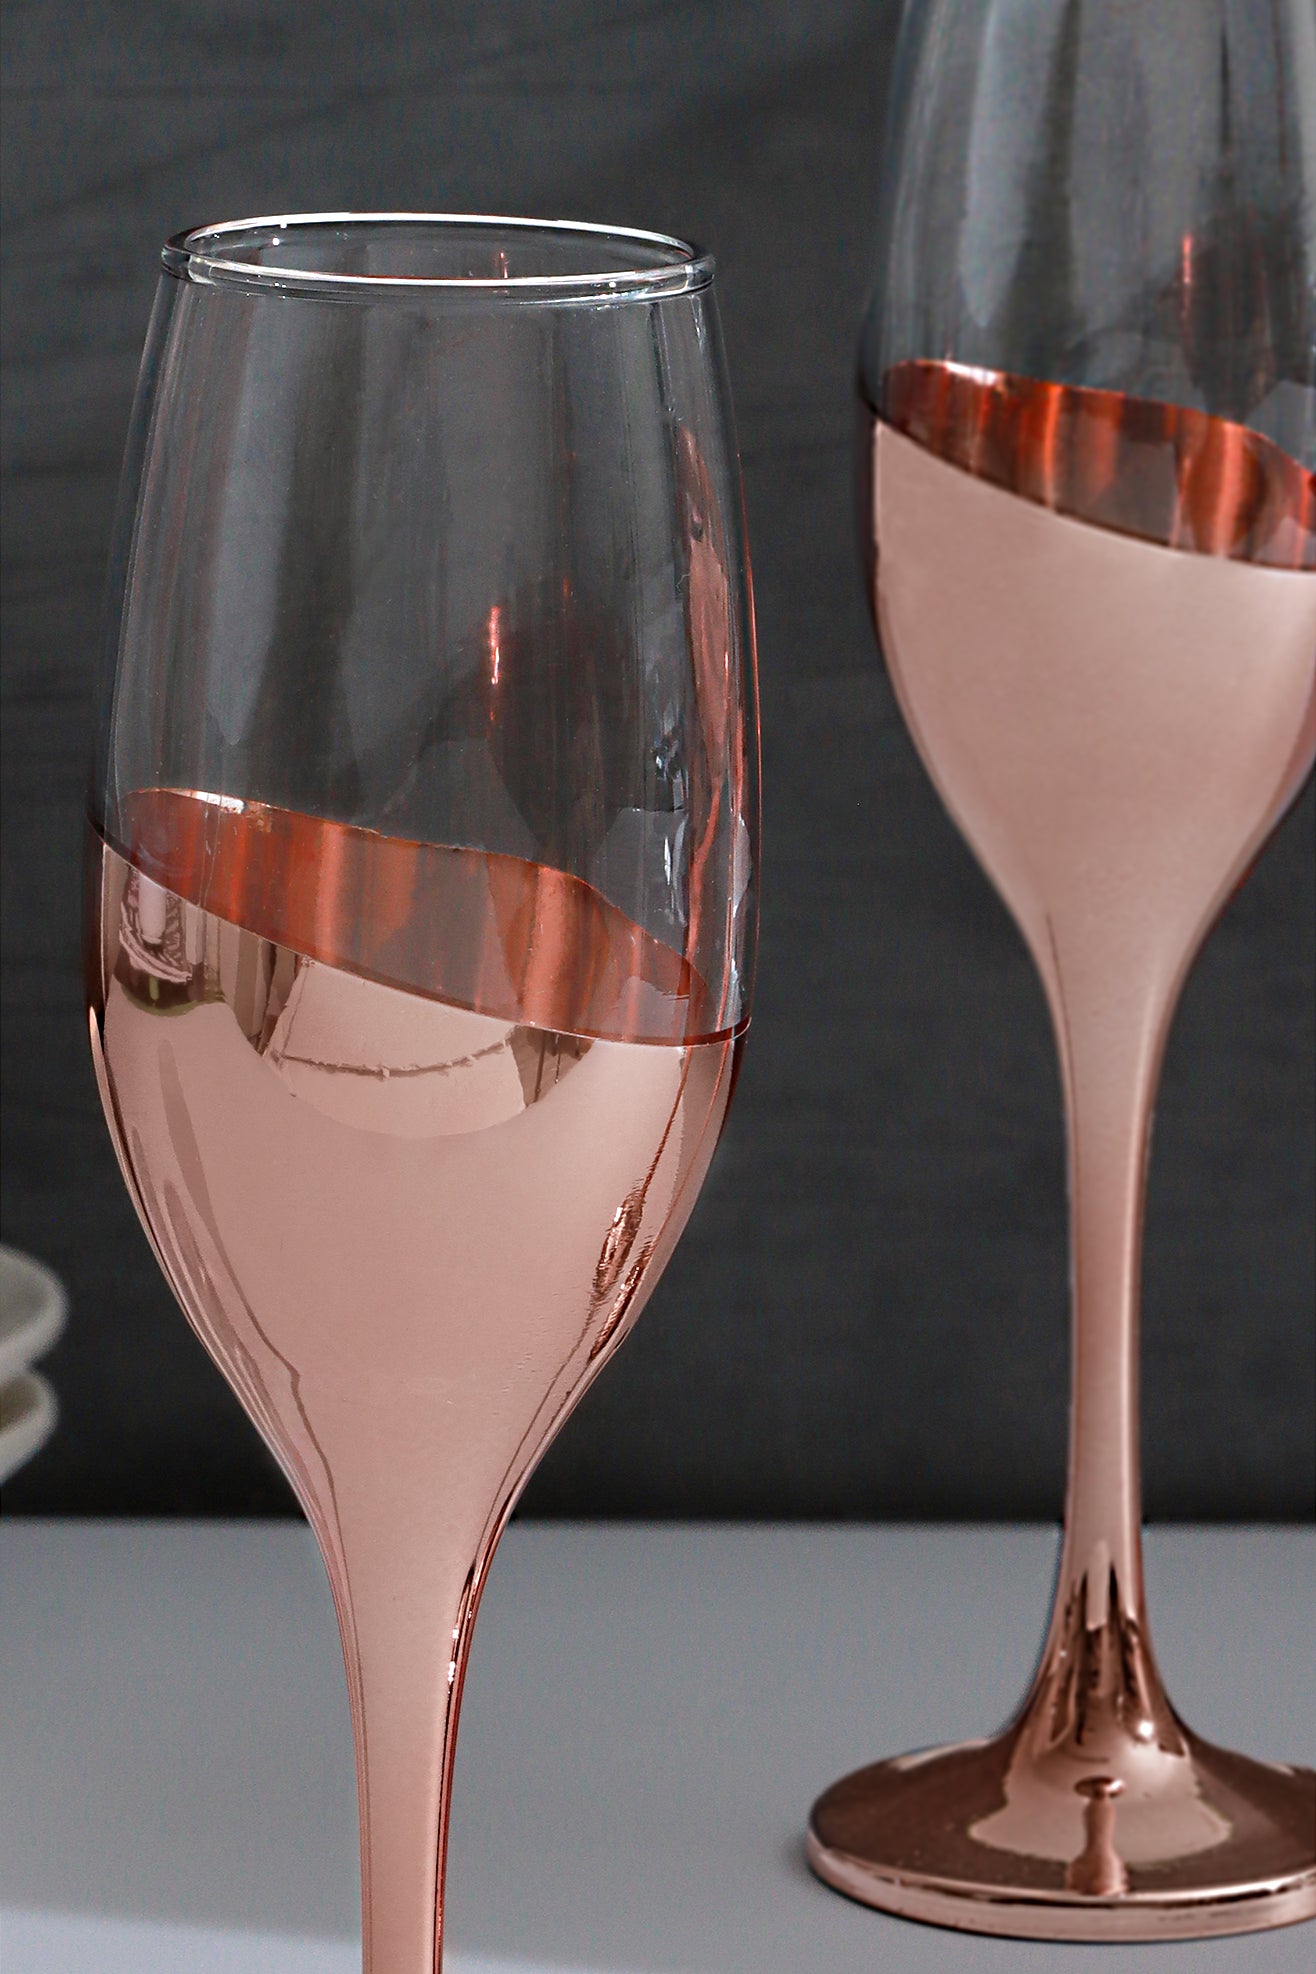 Set of Four Sephora Two-Tone Copper Plated Rose Gold Champagne Glasses